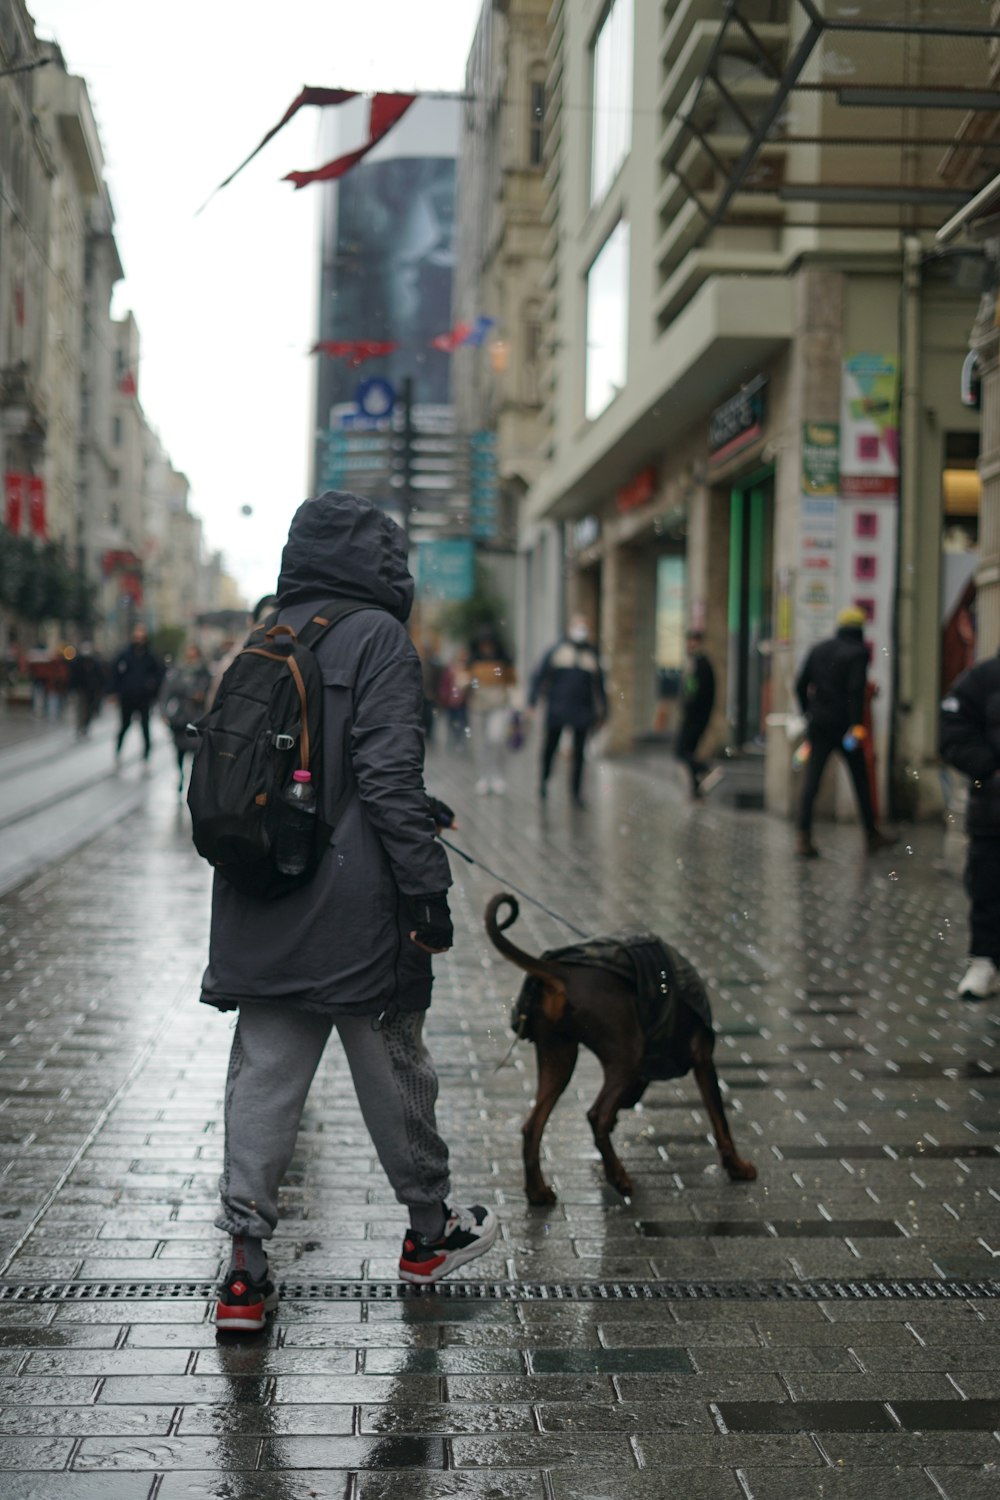 a person walking a dog on a leash in a city